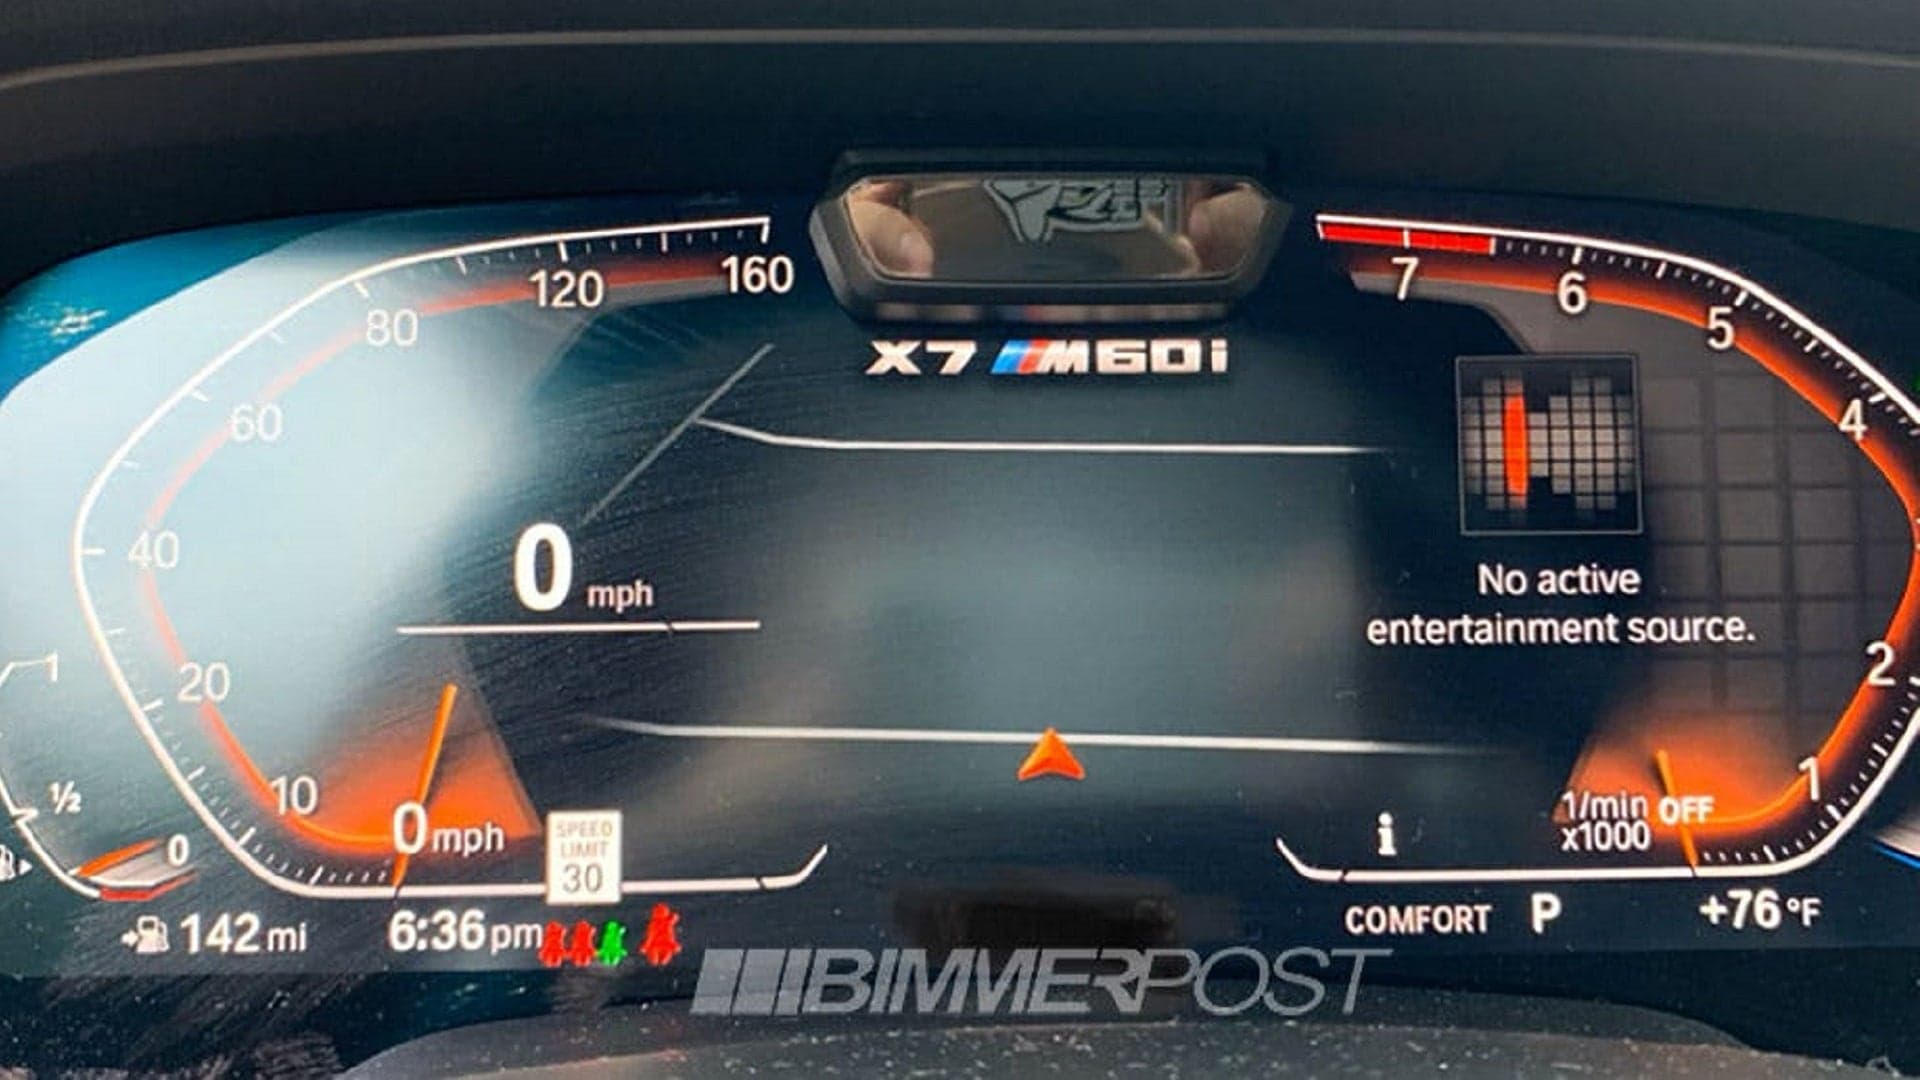 Leaked BMW X7 M60i Graphic Hints at Flagship SUV With V12 Engine